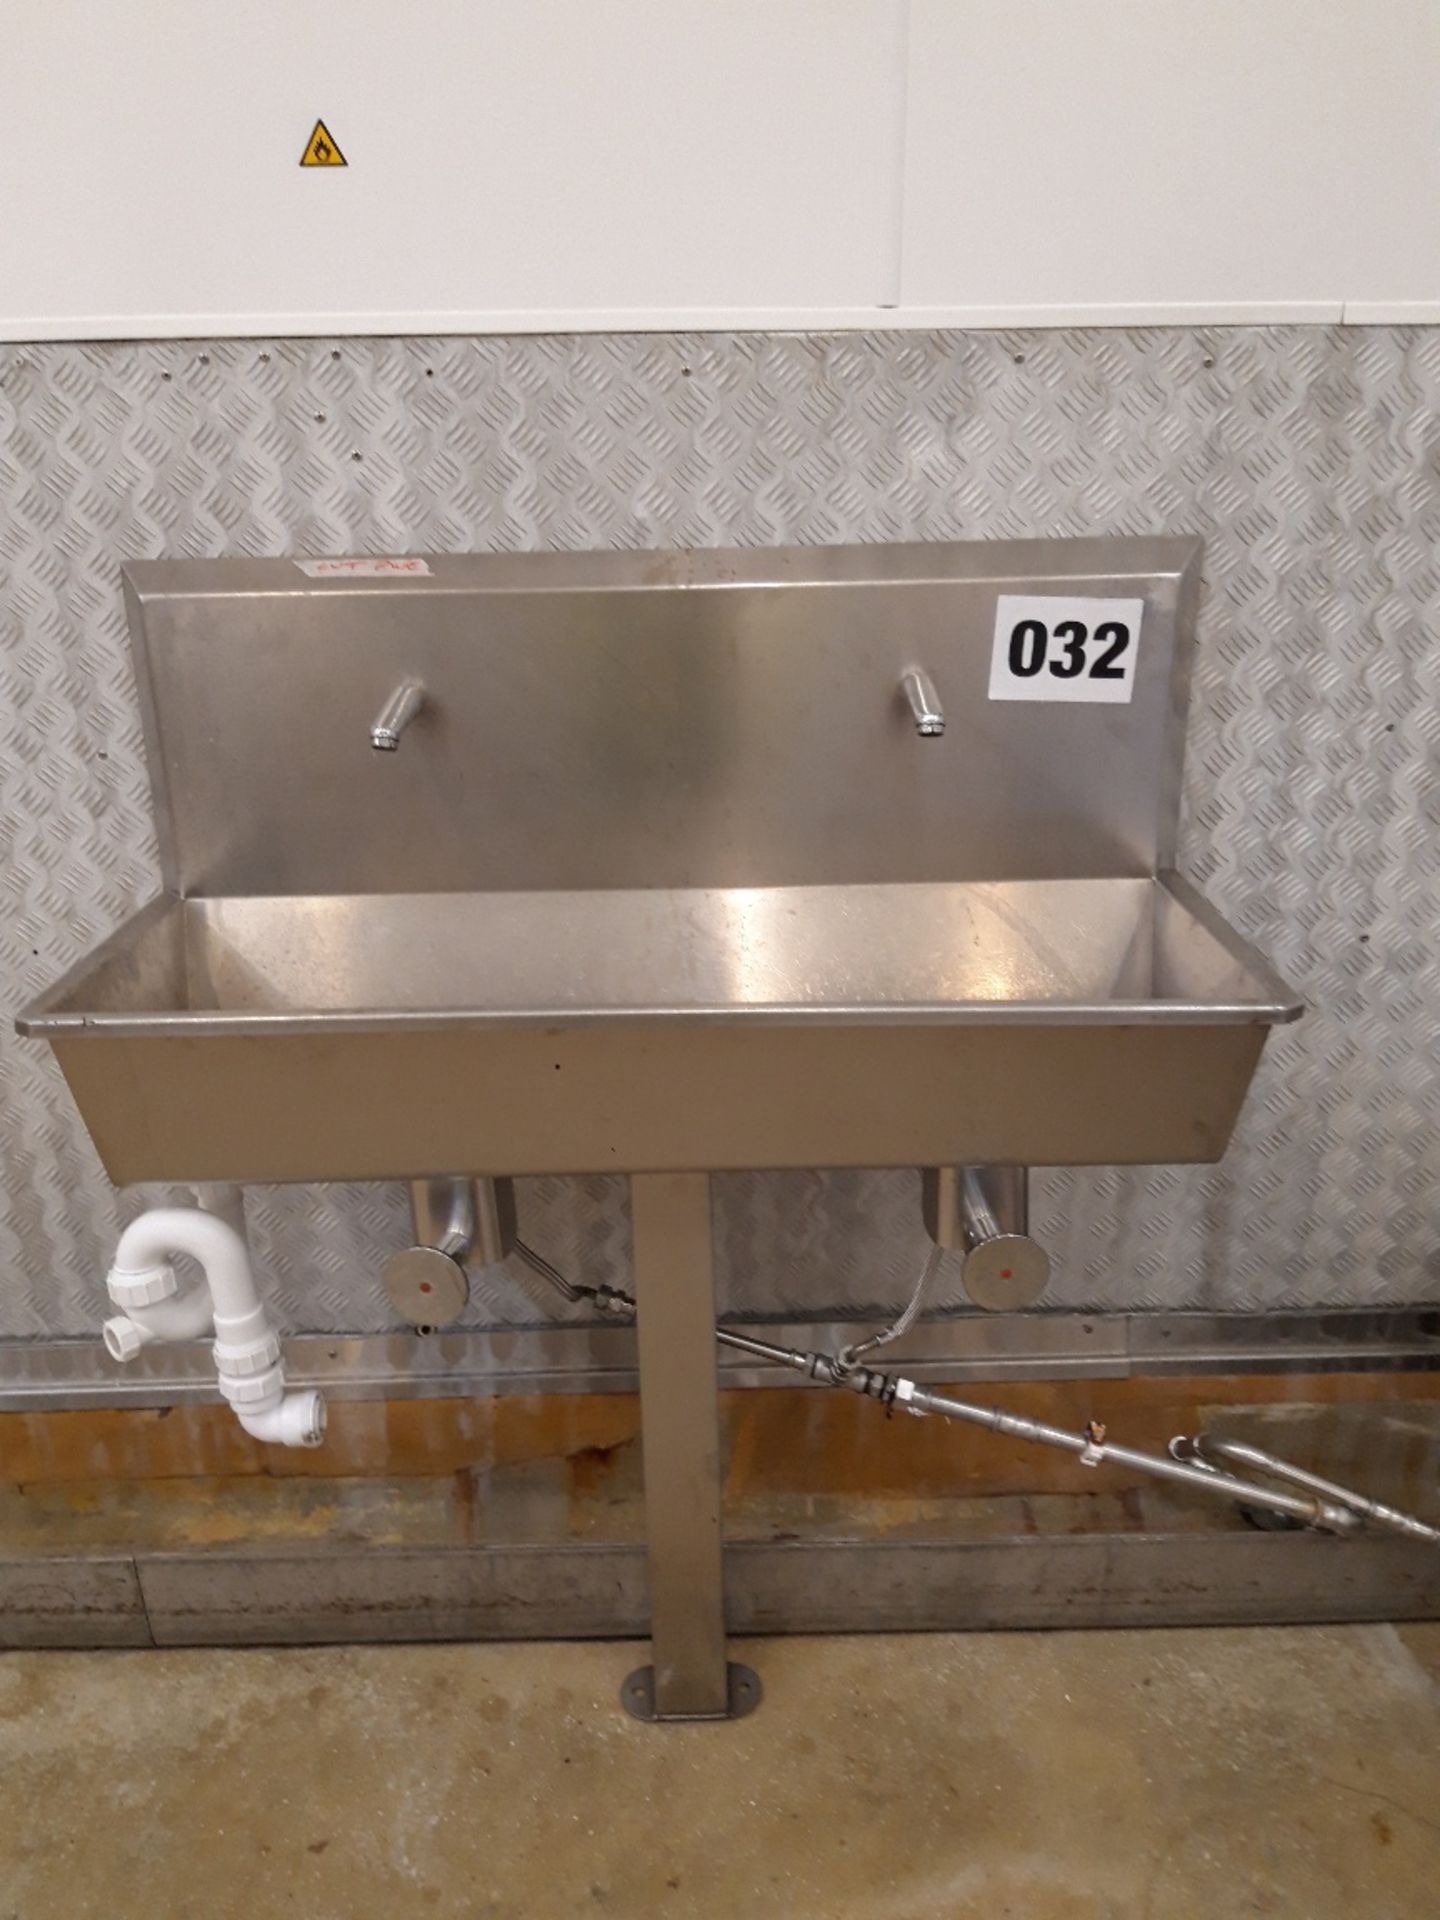 S/s Sink 2 station. Knee operated. Lift out £15